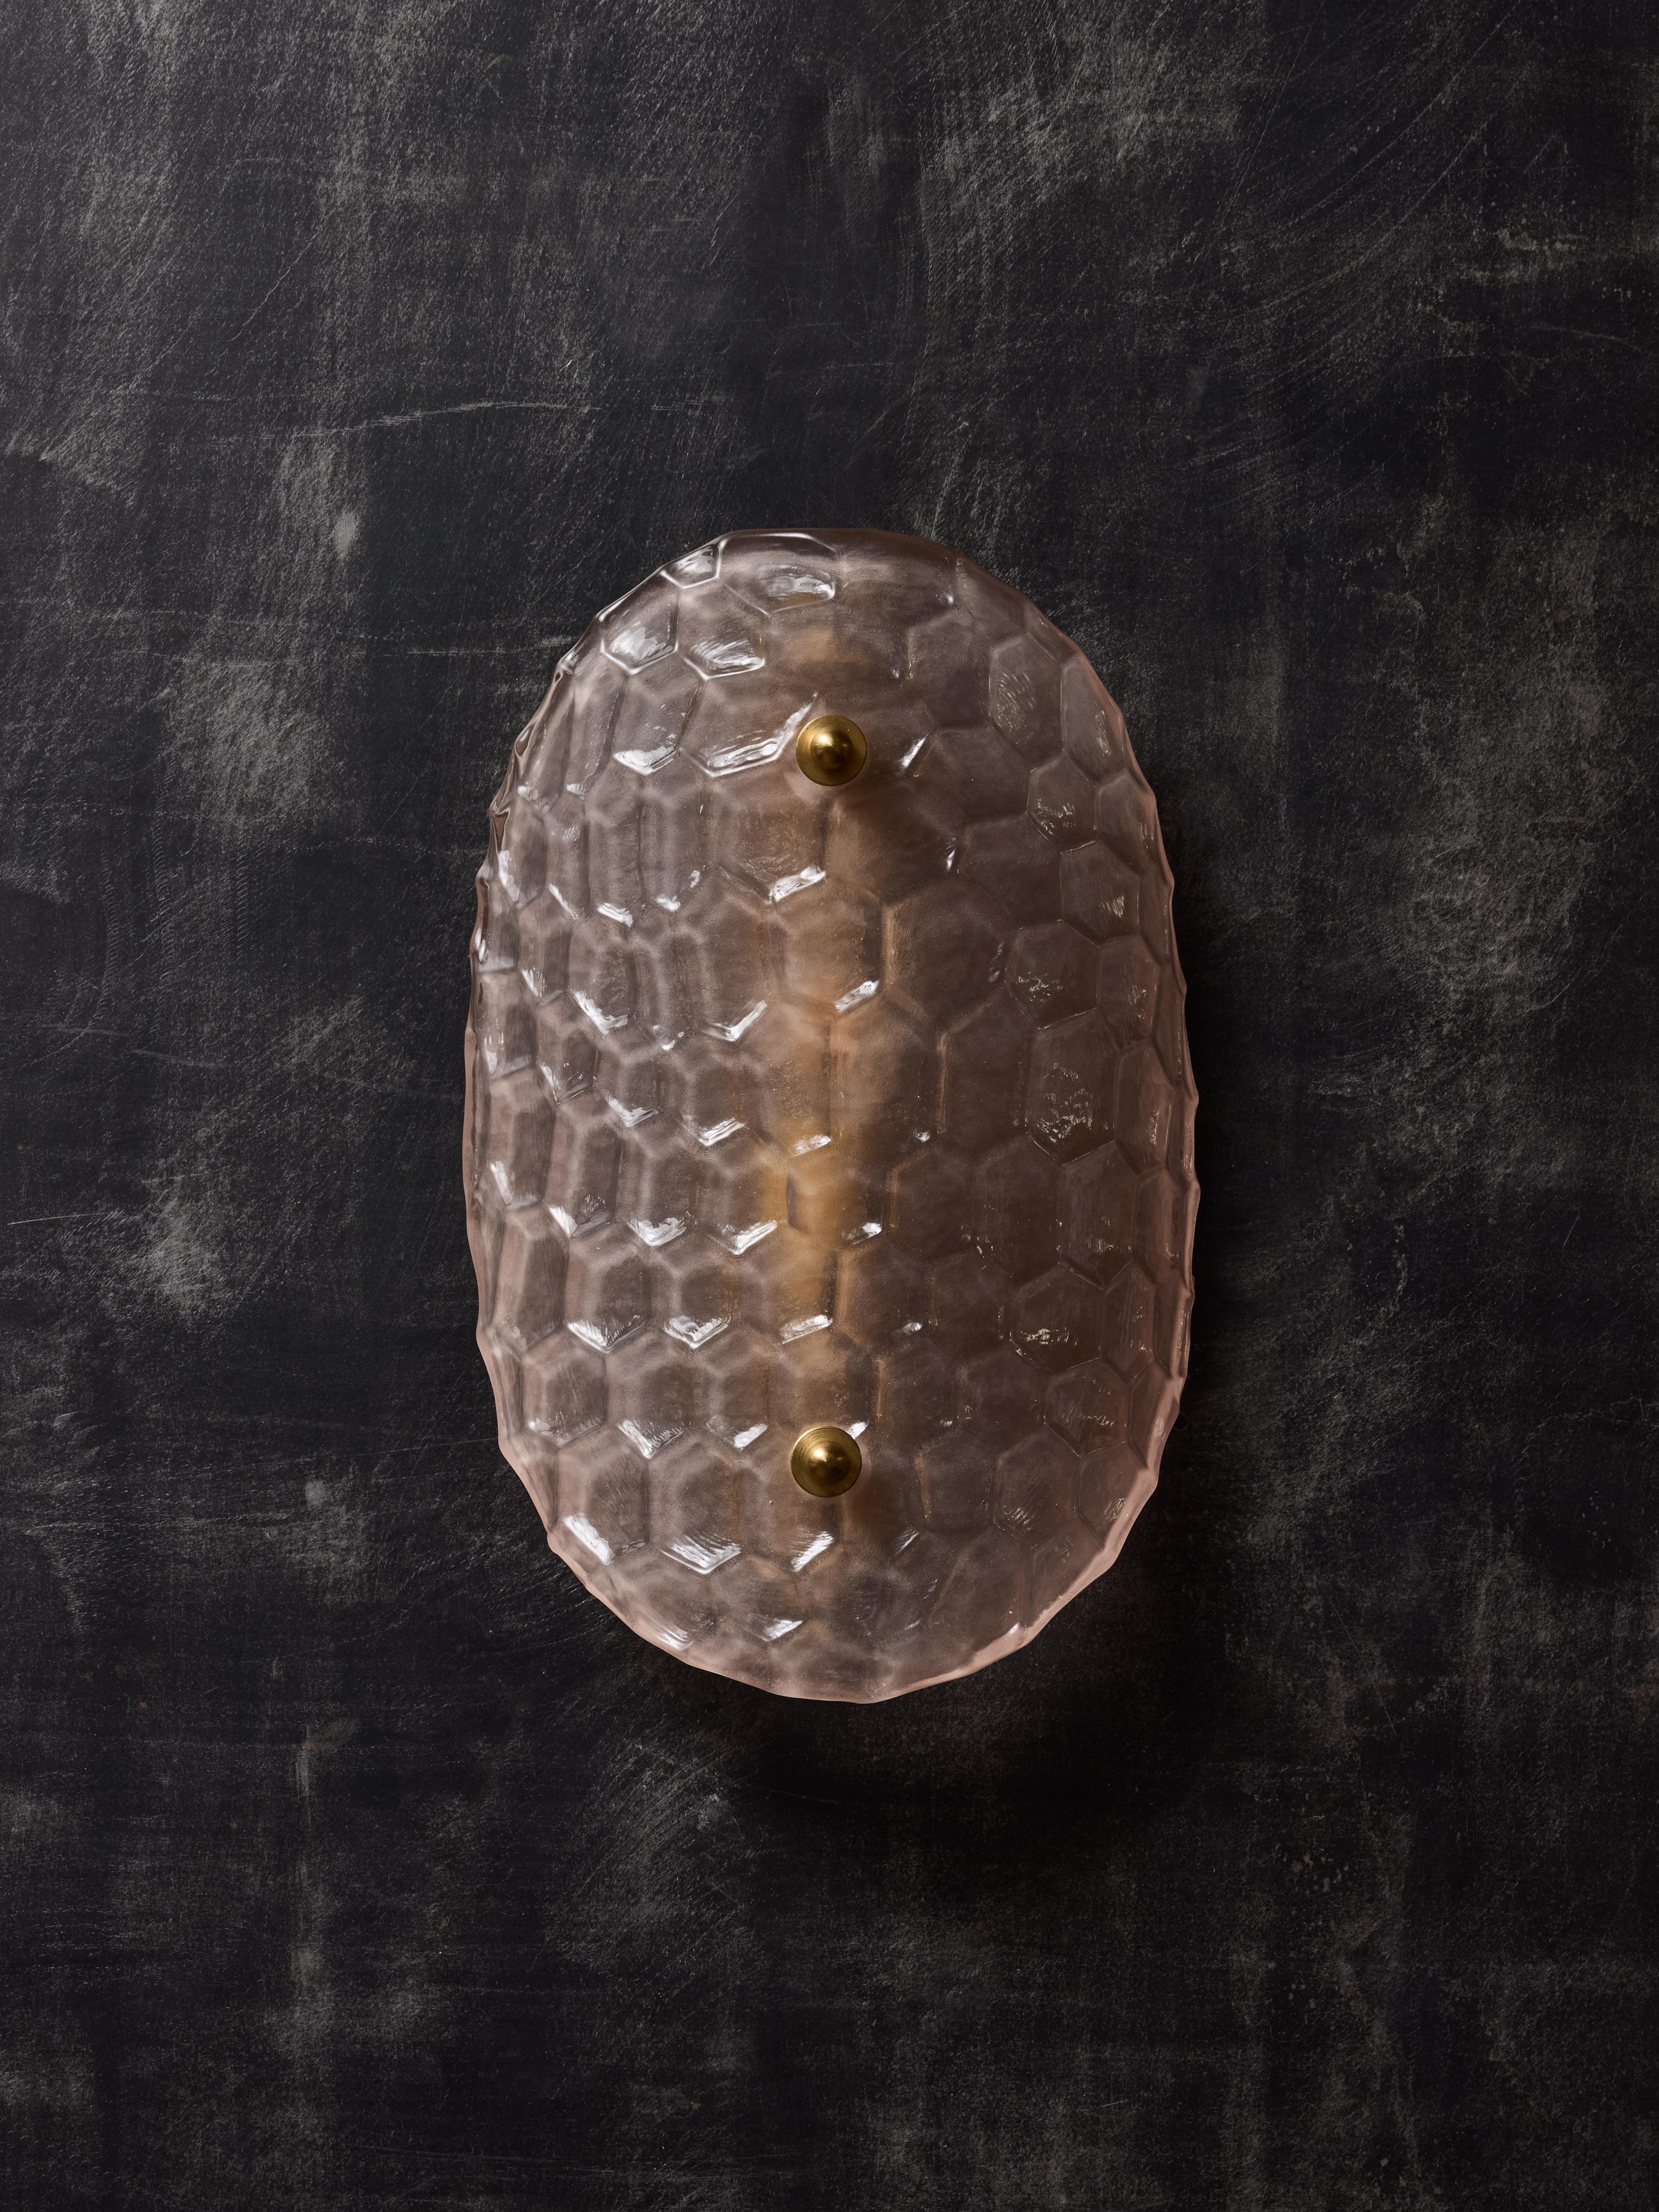 Wall sconces made of a metal back plate, curved Murano glass diffuser with an embossed honeycomb pattern tinted in pink. Finished by brass hardware.

One source of light per sconce